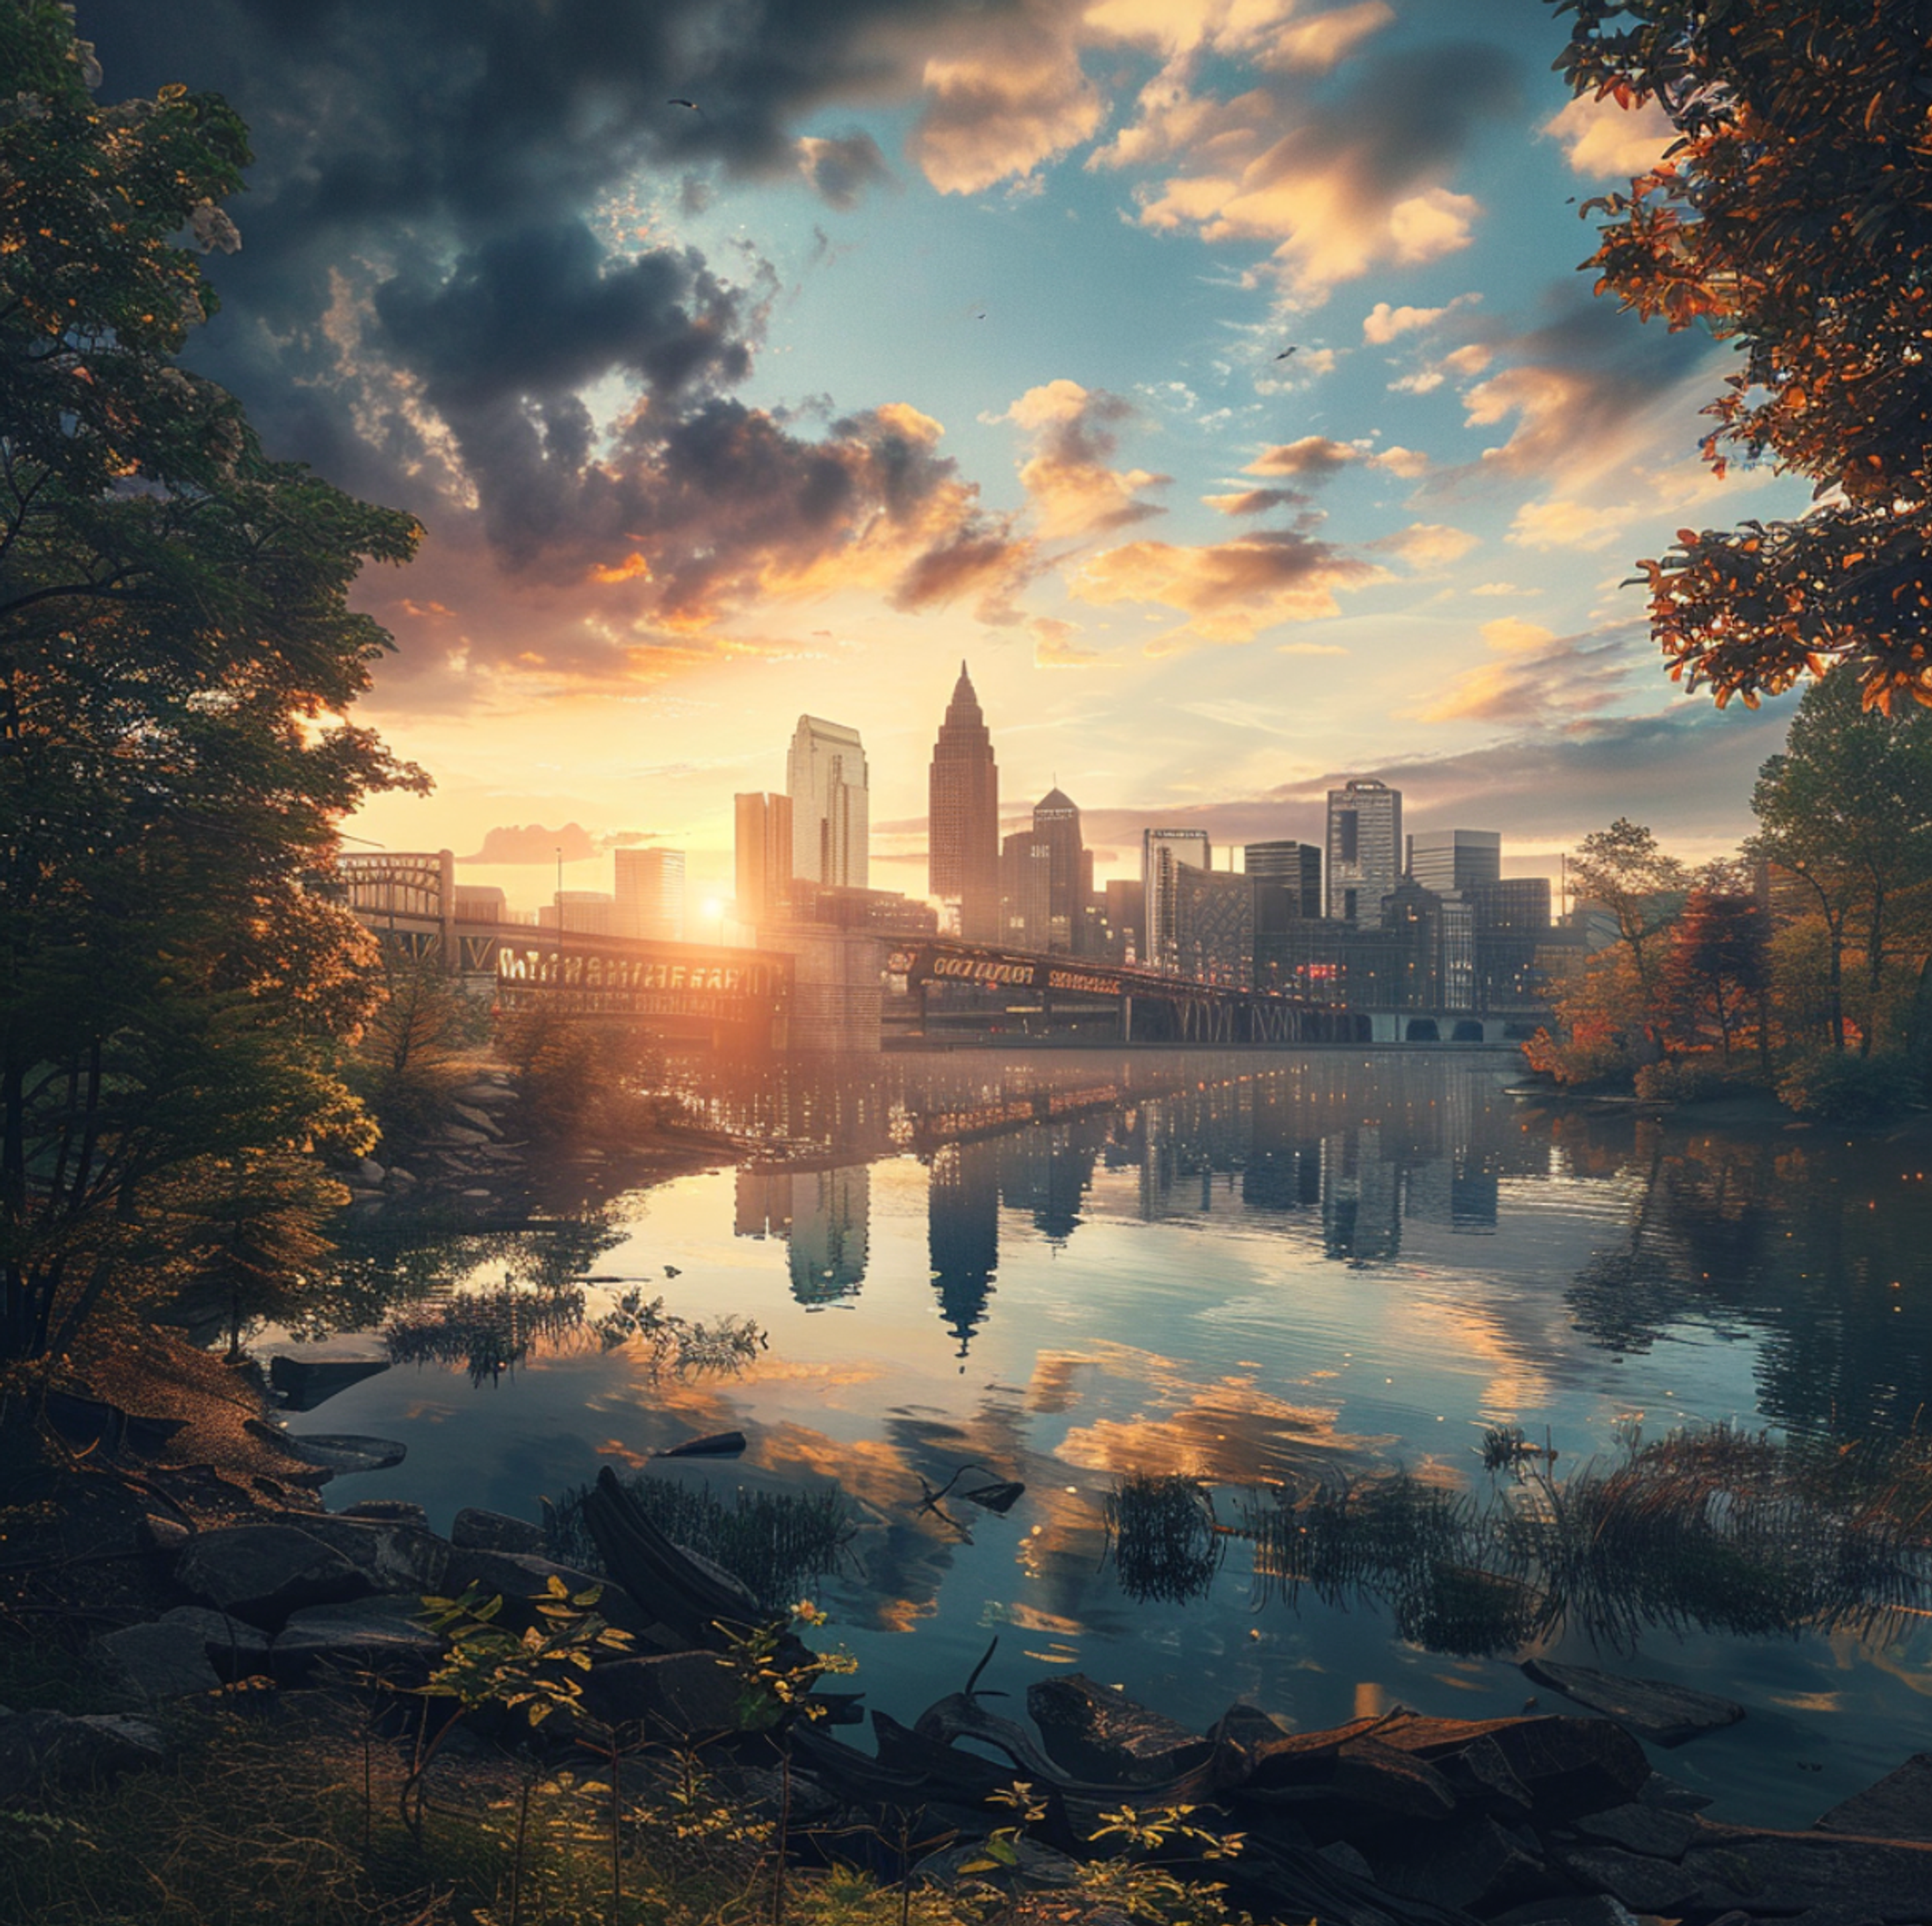 Sunrise over Cleveland, Ohio, with the city skyline reflecting on the calm waters of the Cuyahoga River, framed by verdant foliage and the dawning sky, evoking the city's serene beauty and dynamic urban life.